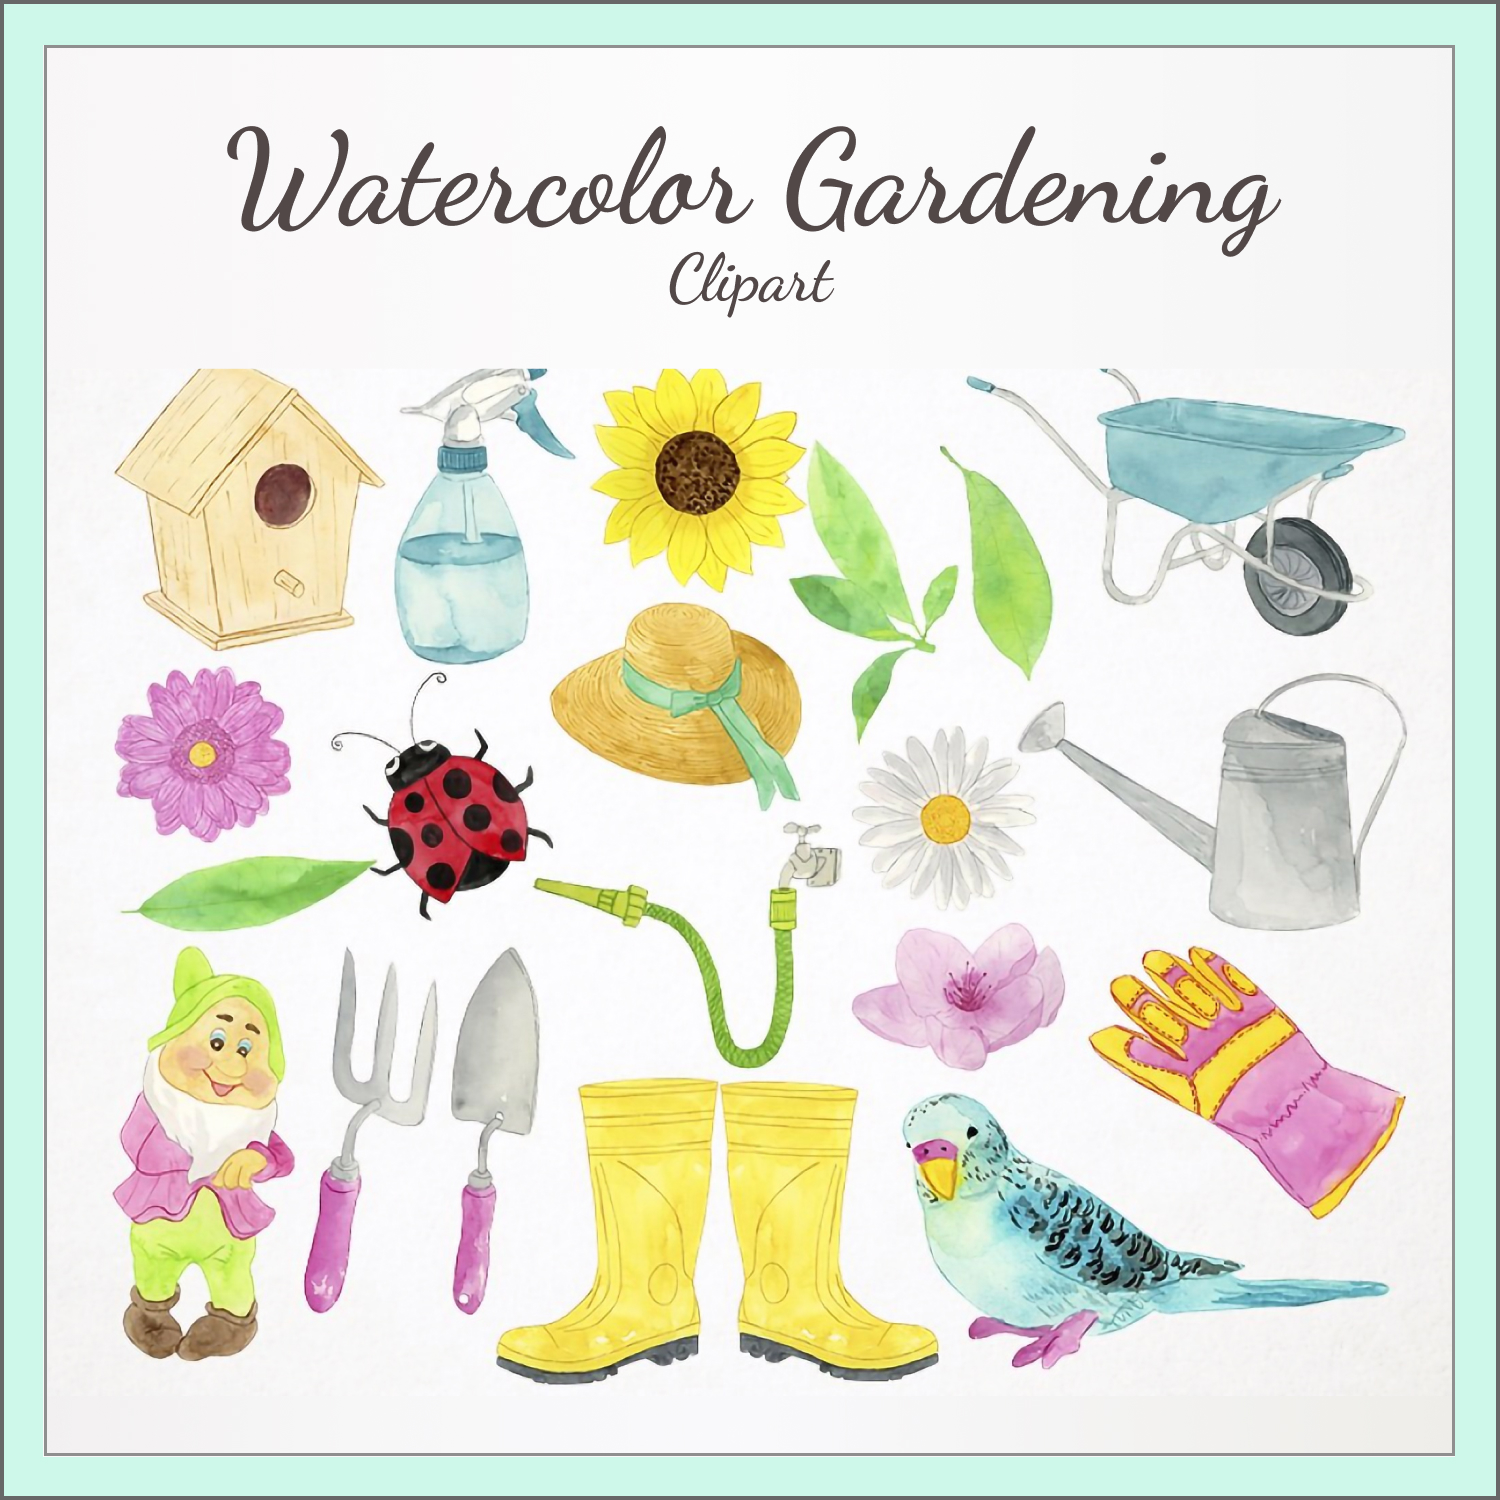 Watercolor gardening clipart preview.